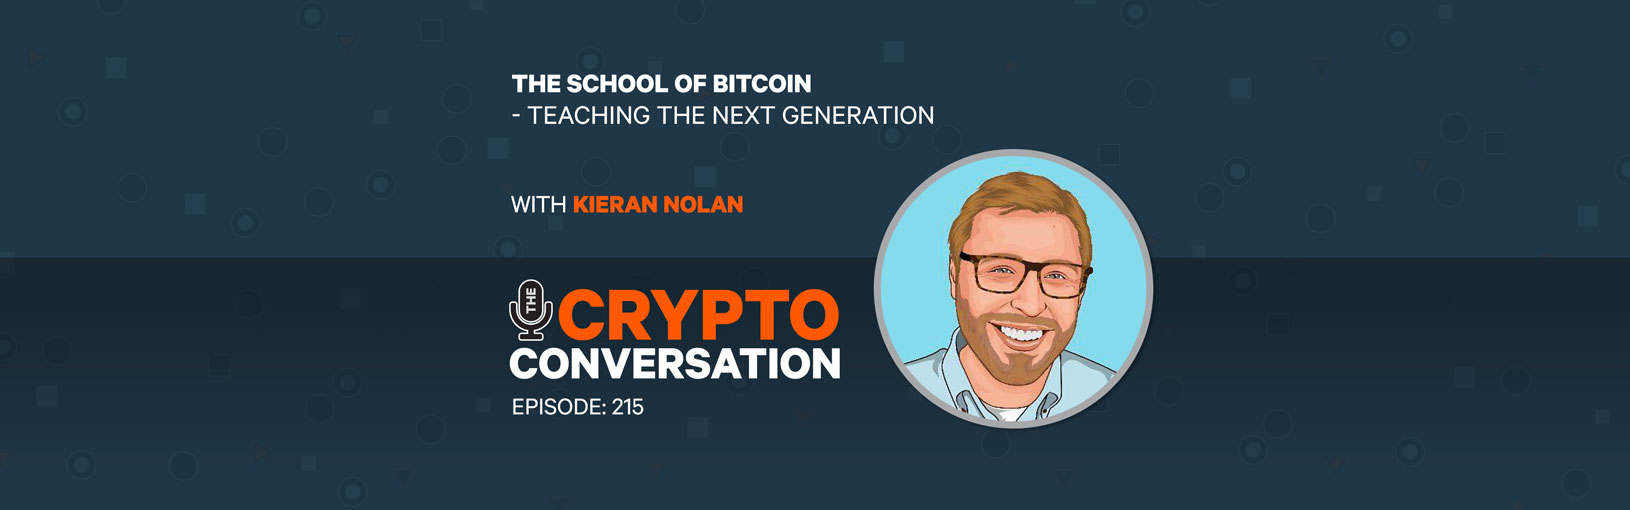 The School of Bitcoin – Teaching the next generation